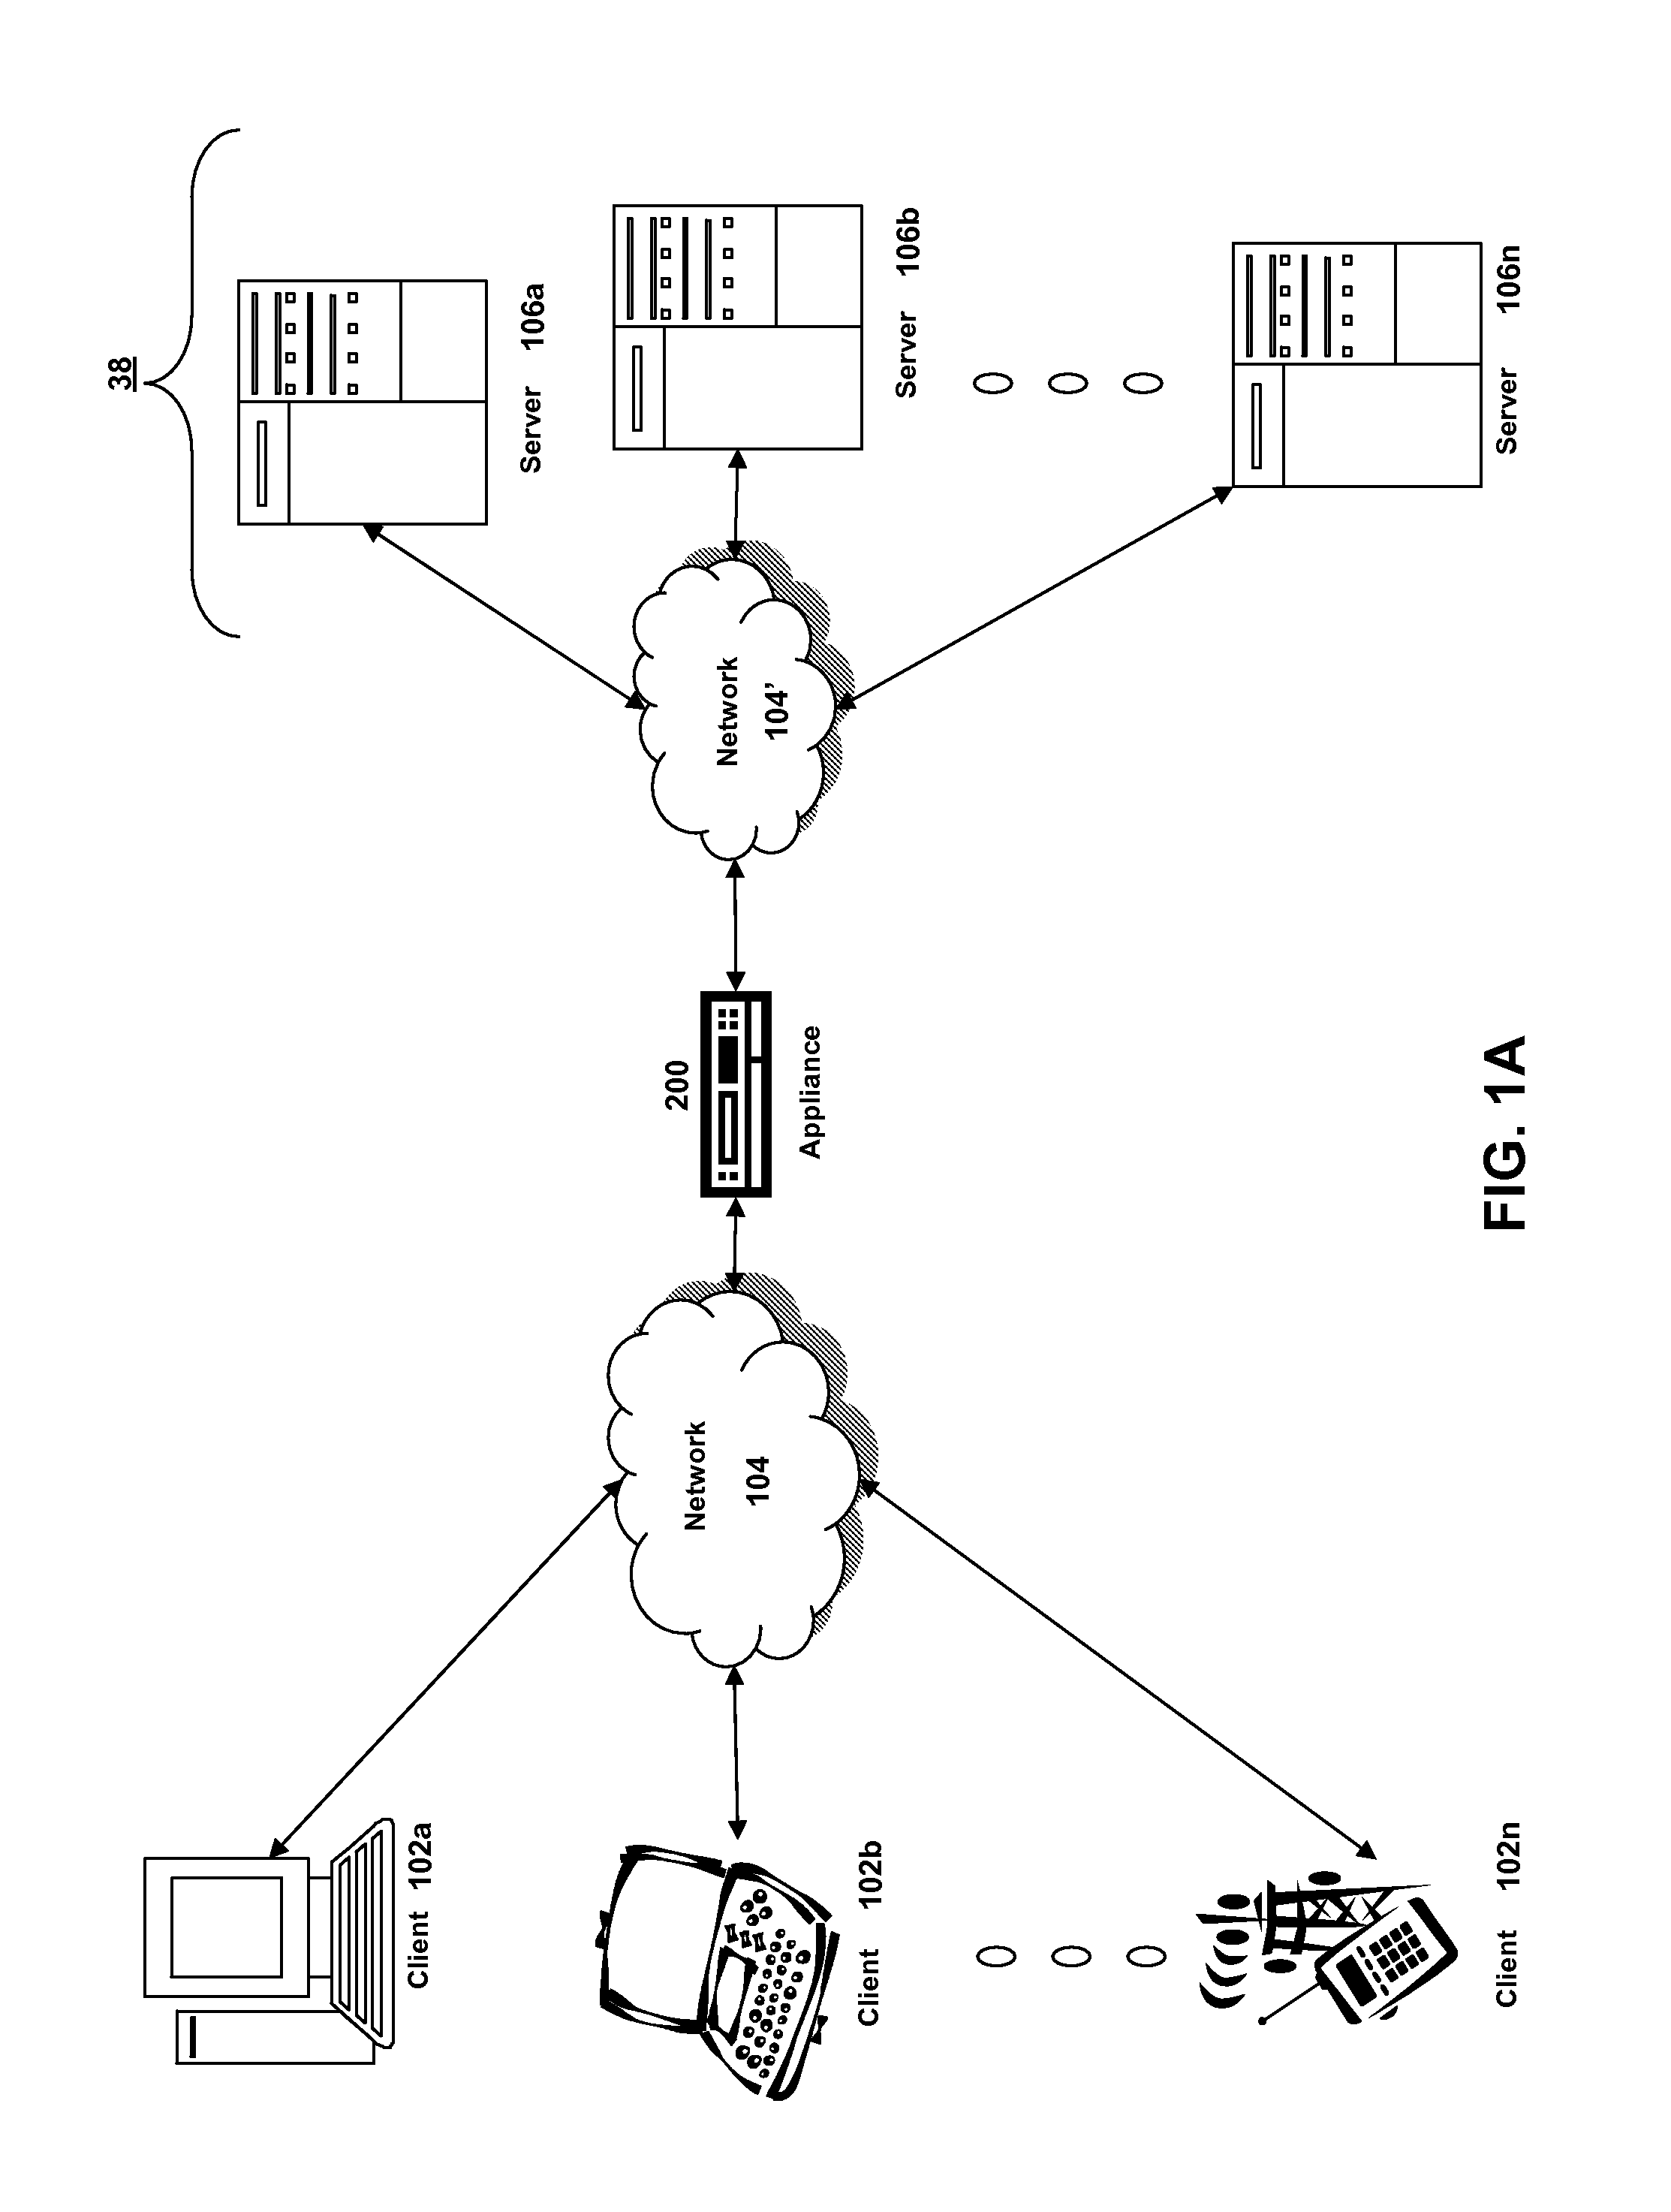 Systems and methods for configuring policy bank invocations